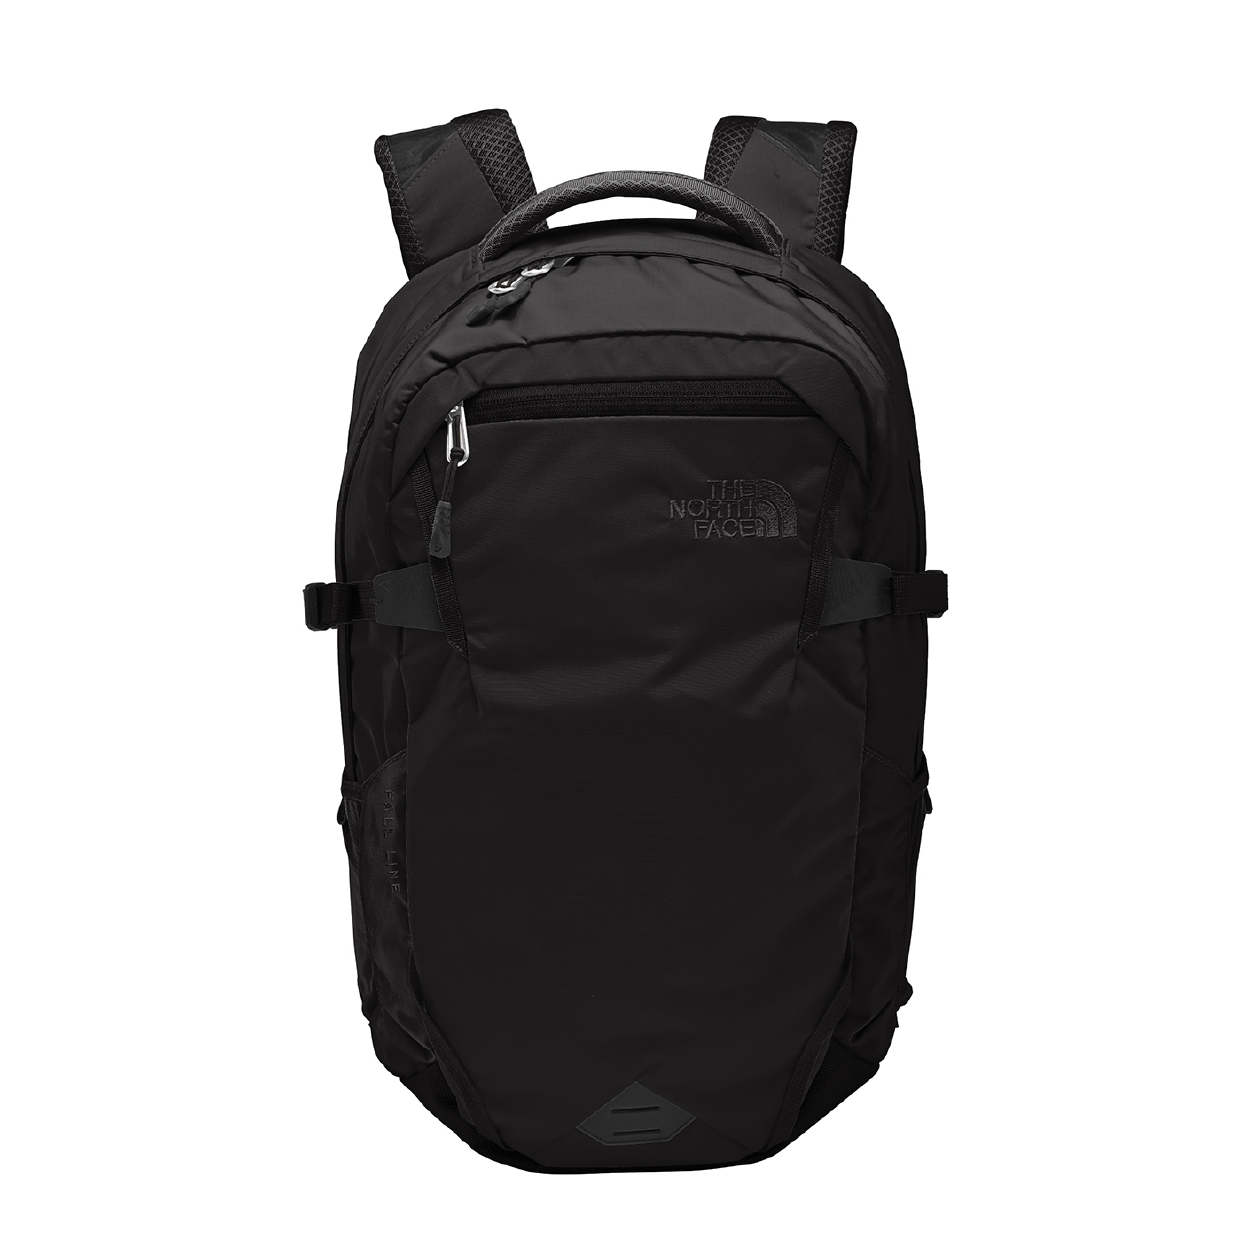 The North Face ® Fall Line Backpack – accessline